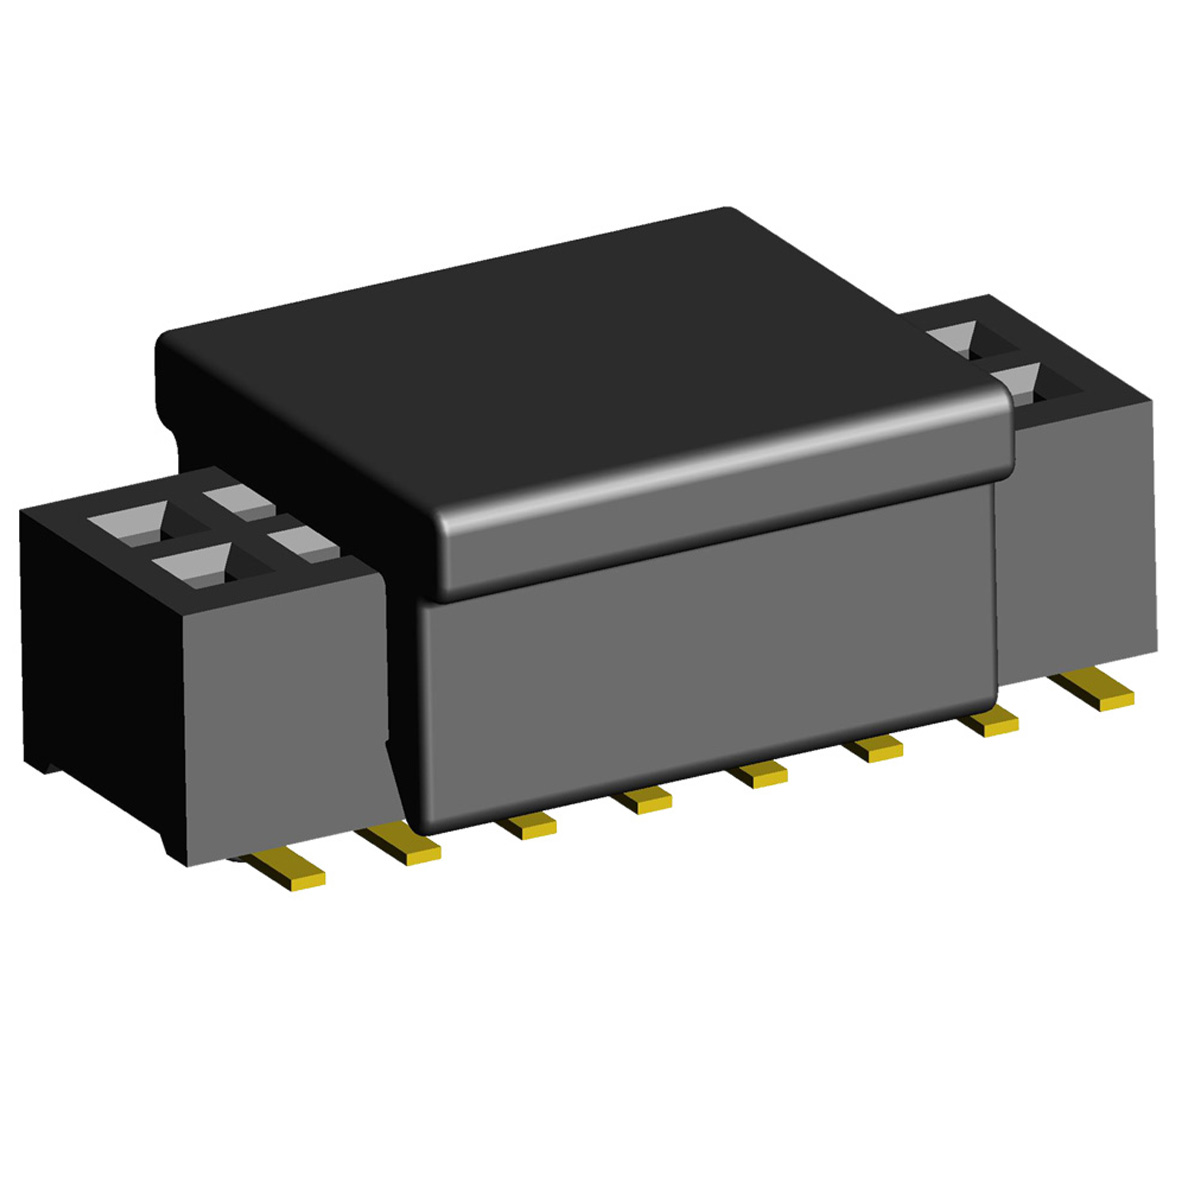 2192SM4-XXXG-CP series, double row straight sockets with guides on PCB for surface mounting (SMD), pitch 1.00 mm, Board-to-Board connectors, pin headers and sockets for them > pitch 1.00 mm